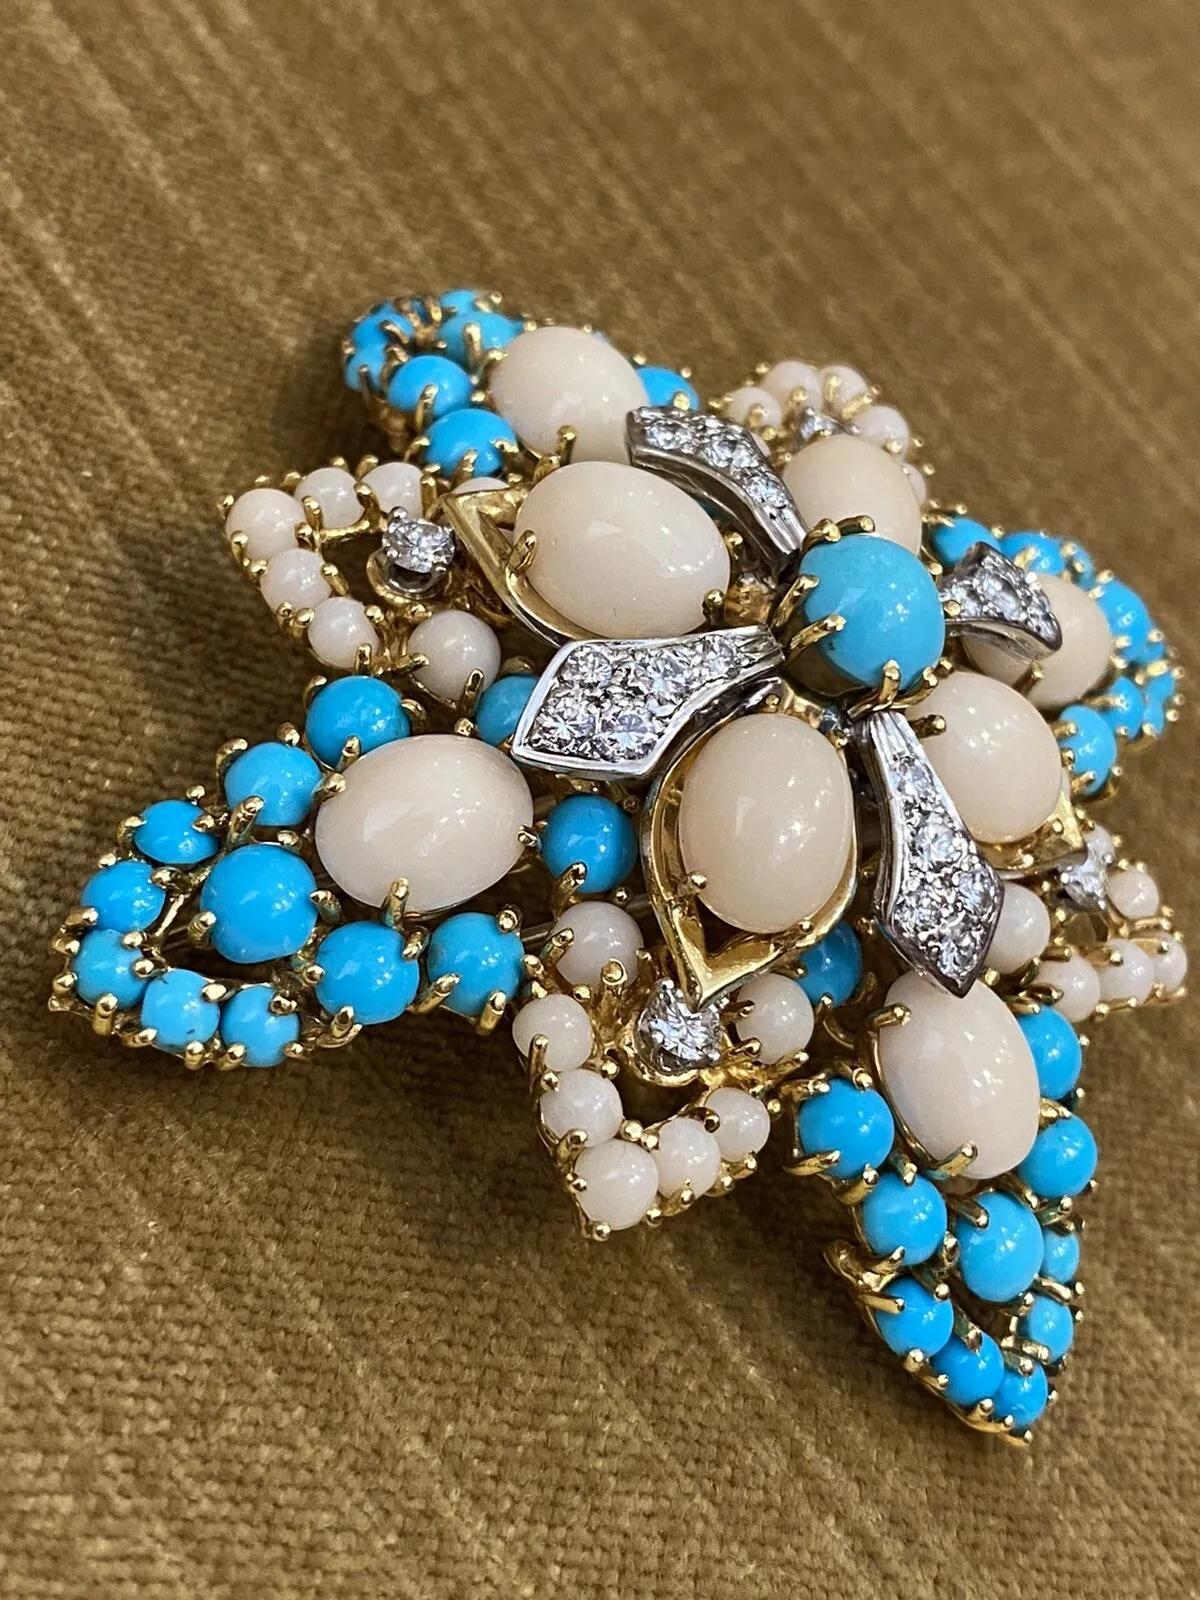 Angel Skin Coral & Turquoise Maltese Cross Pin Brooch 18k Yellow Gold In Excellent Condition For Sale In La Jolla, CA